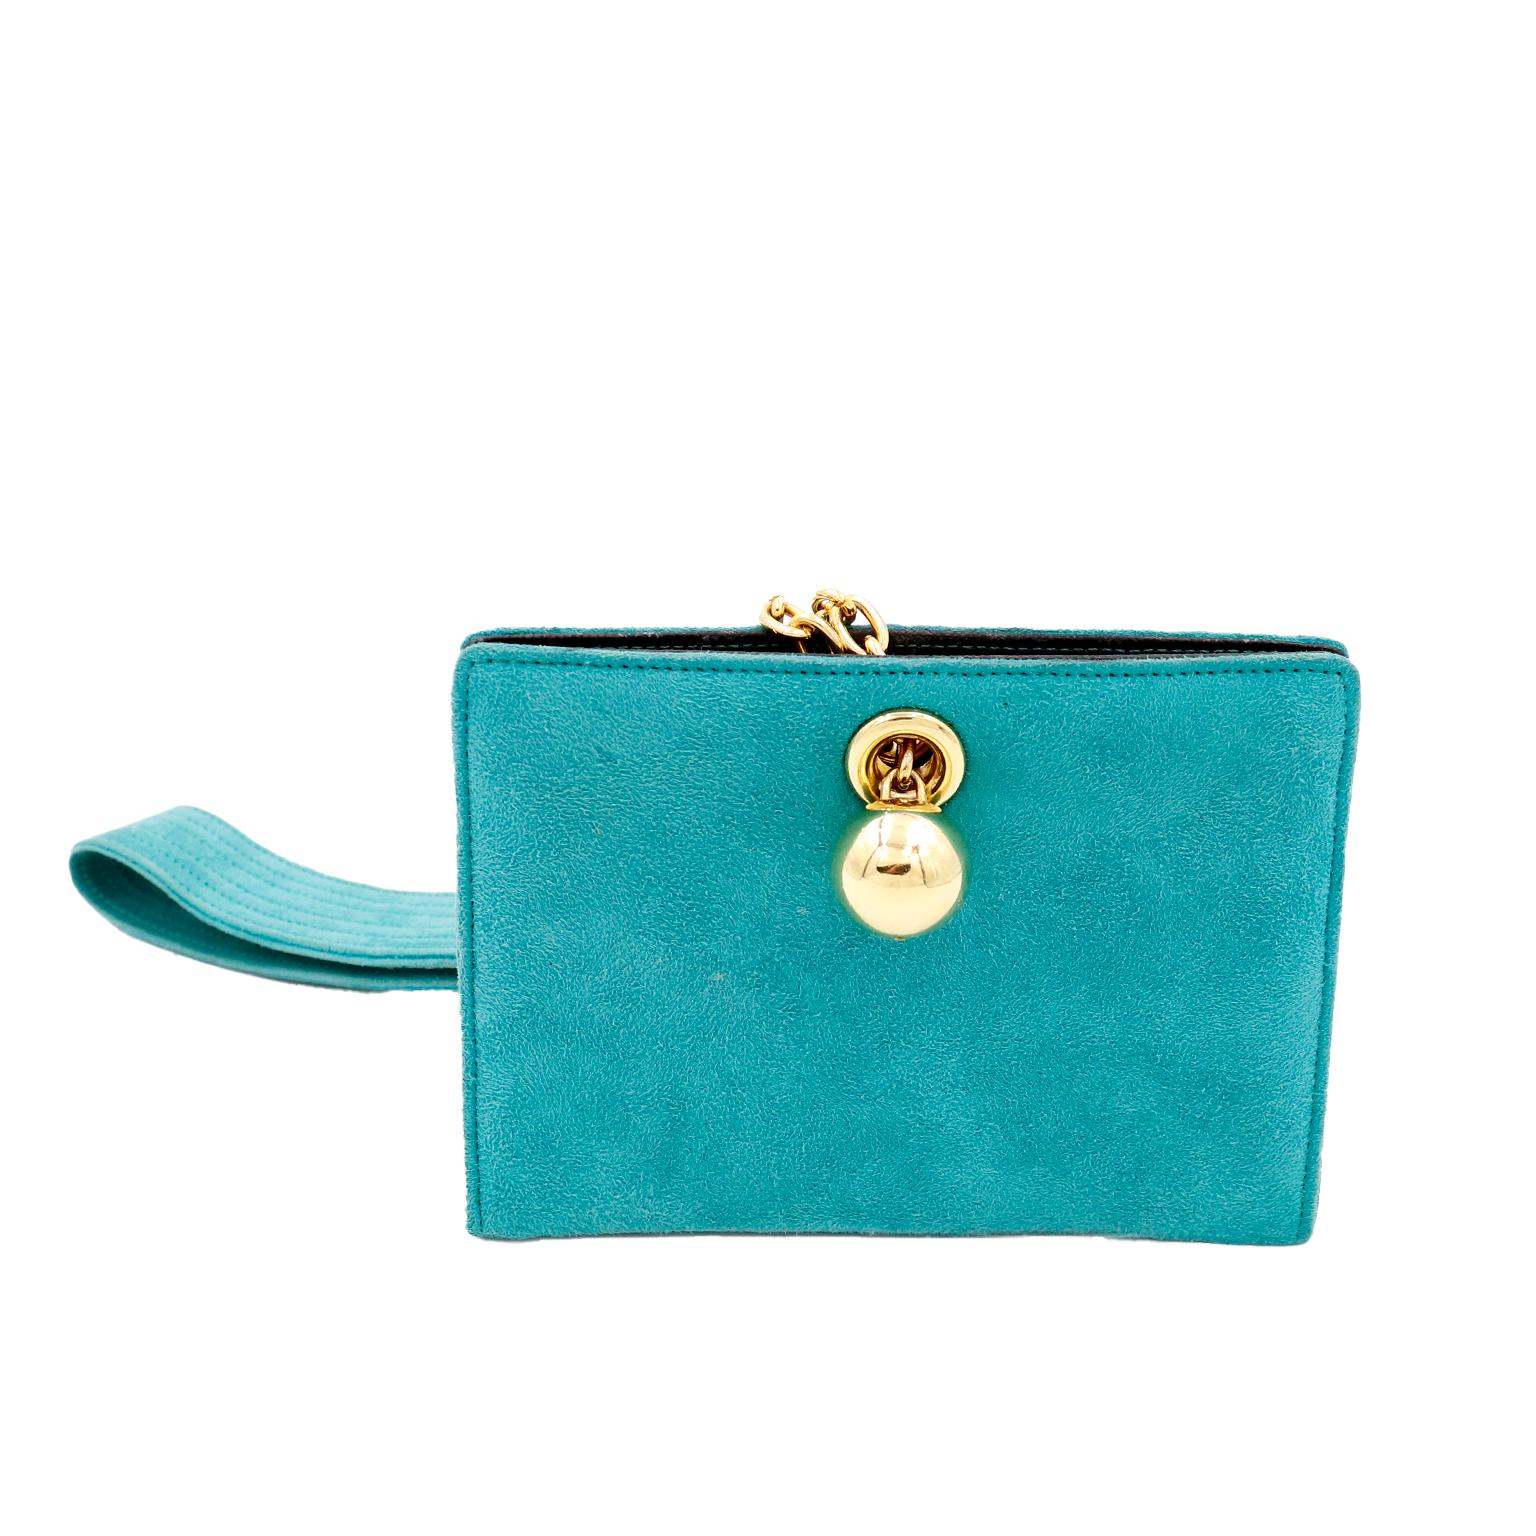 Vintage 1980s Jean Claude Jitrois Teal Green Suede Wristlet Evening Bag In Good Condition For Sale In Portland, OR